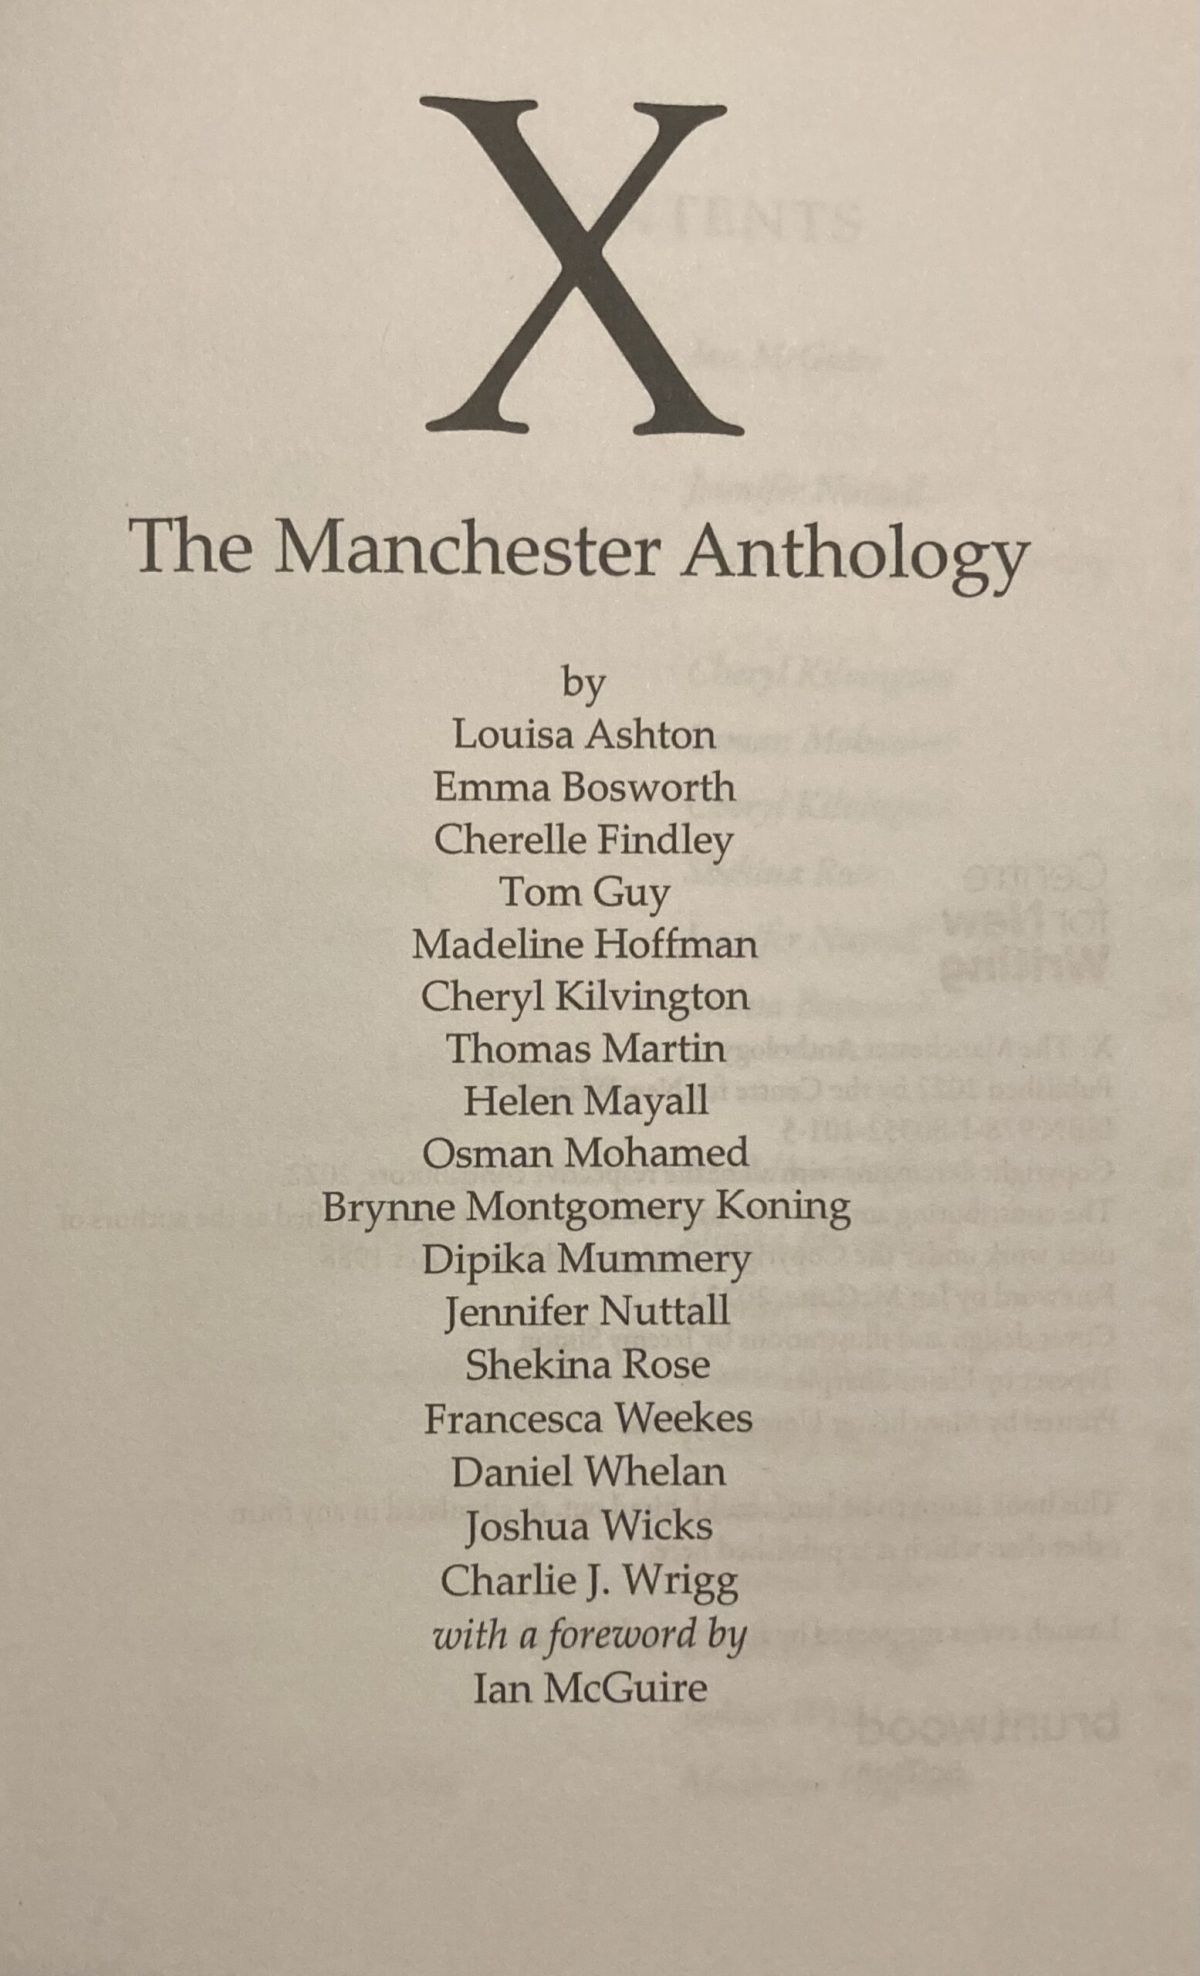 X: A Manchester Anthology review